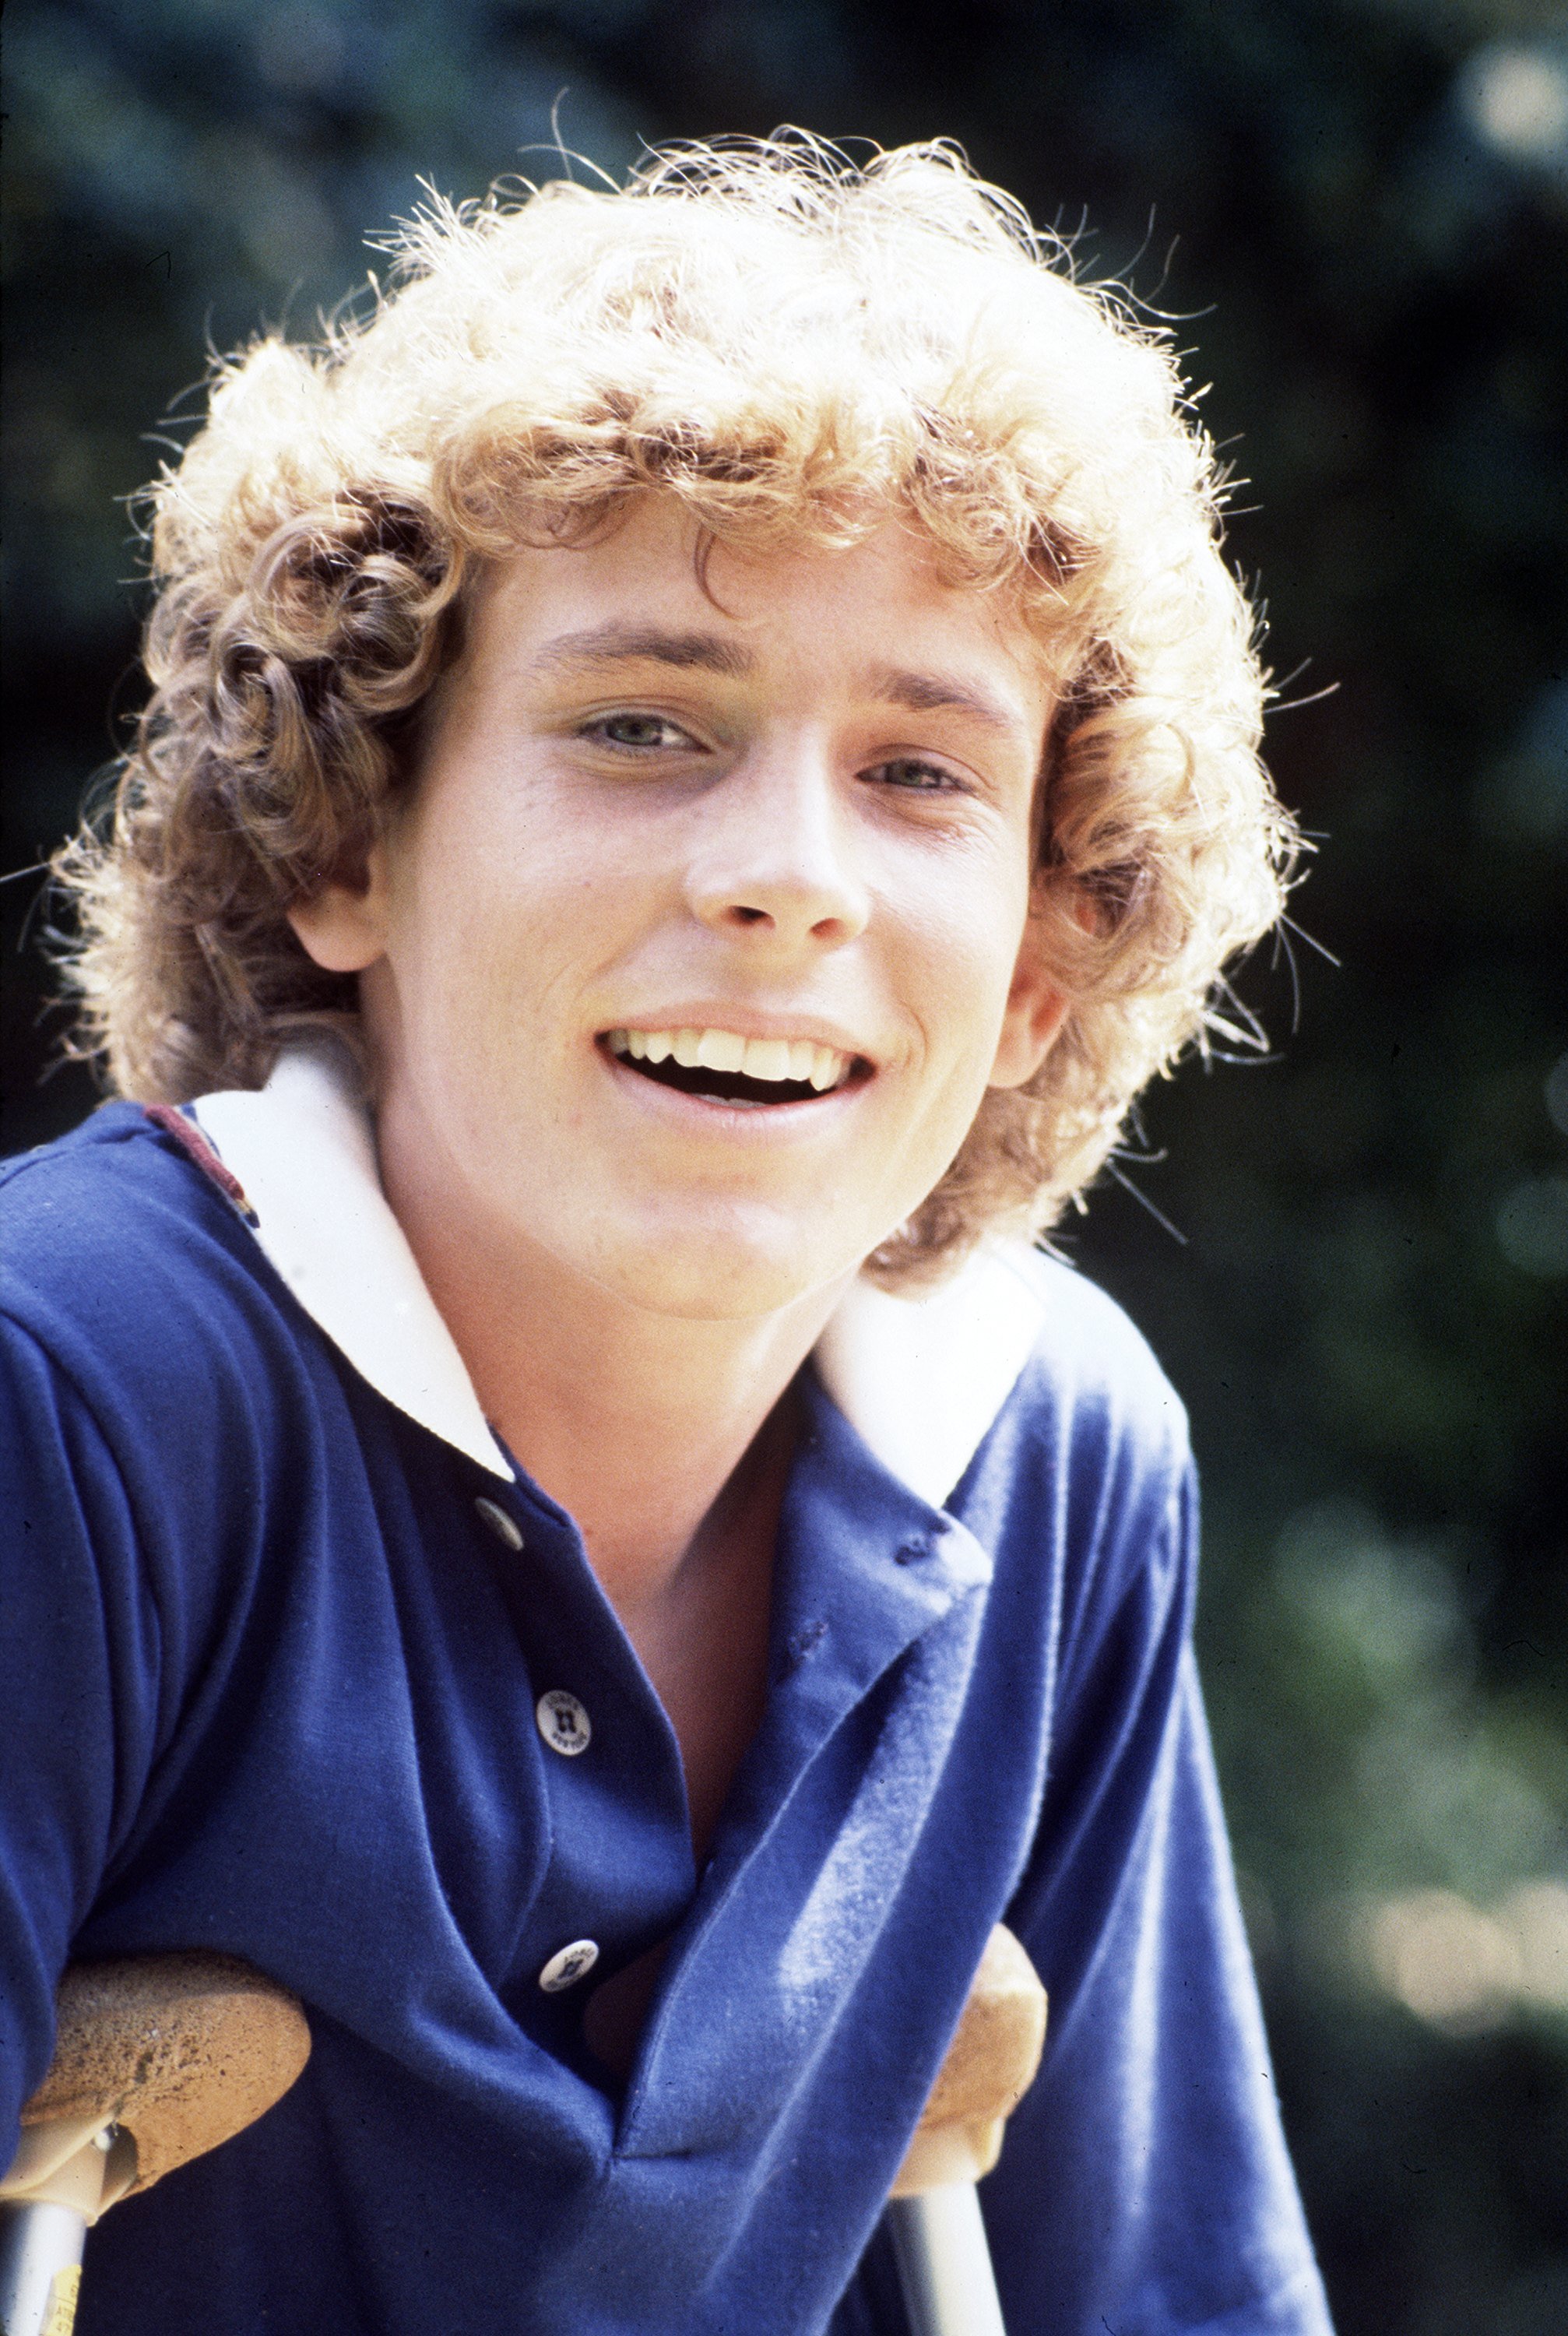 Willie Aames as Tommy Bradford in "Eight Is Enough" | Source: Getty Images